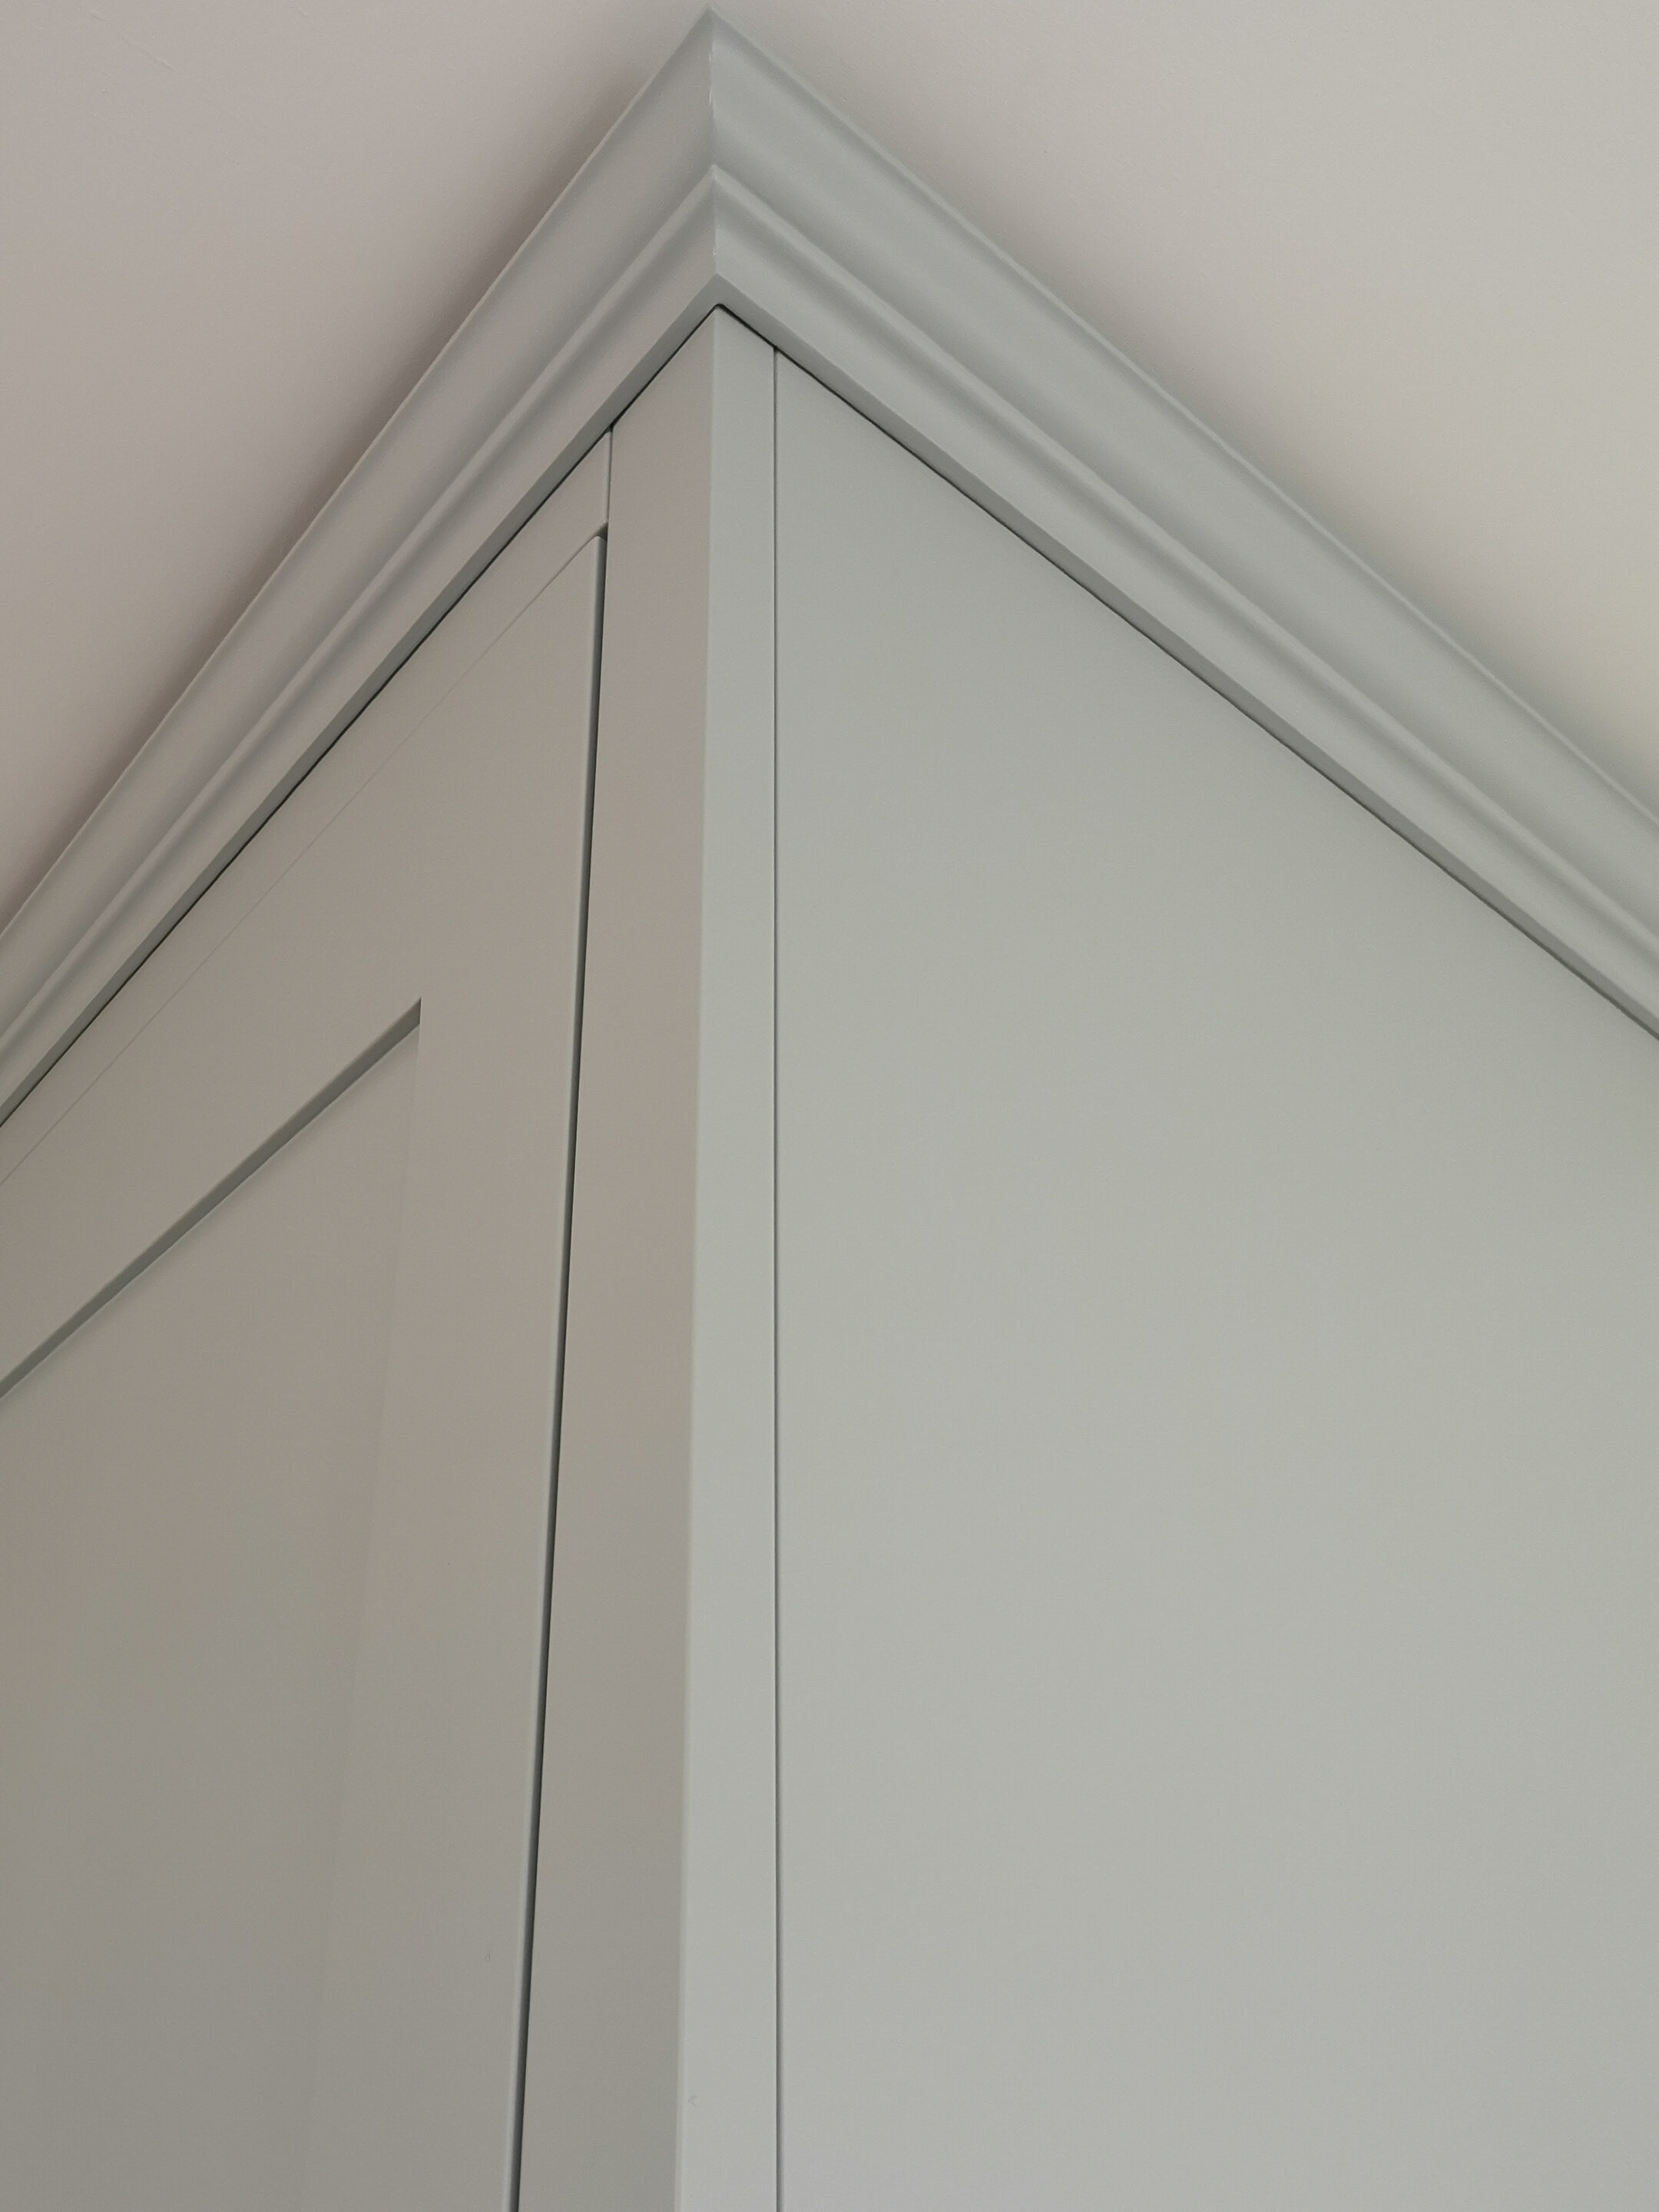 Picture shows Cornice Detailing on bespoke shaker style wardrobes.